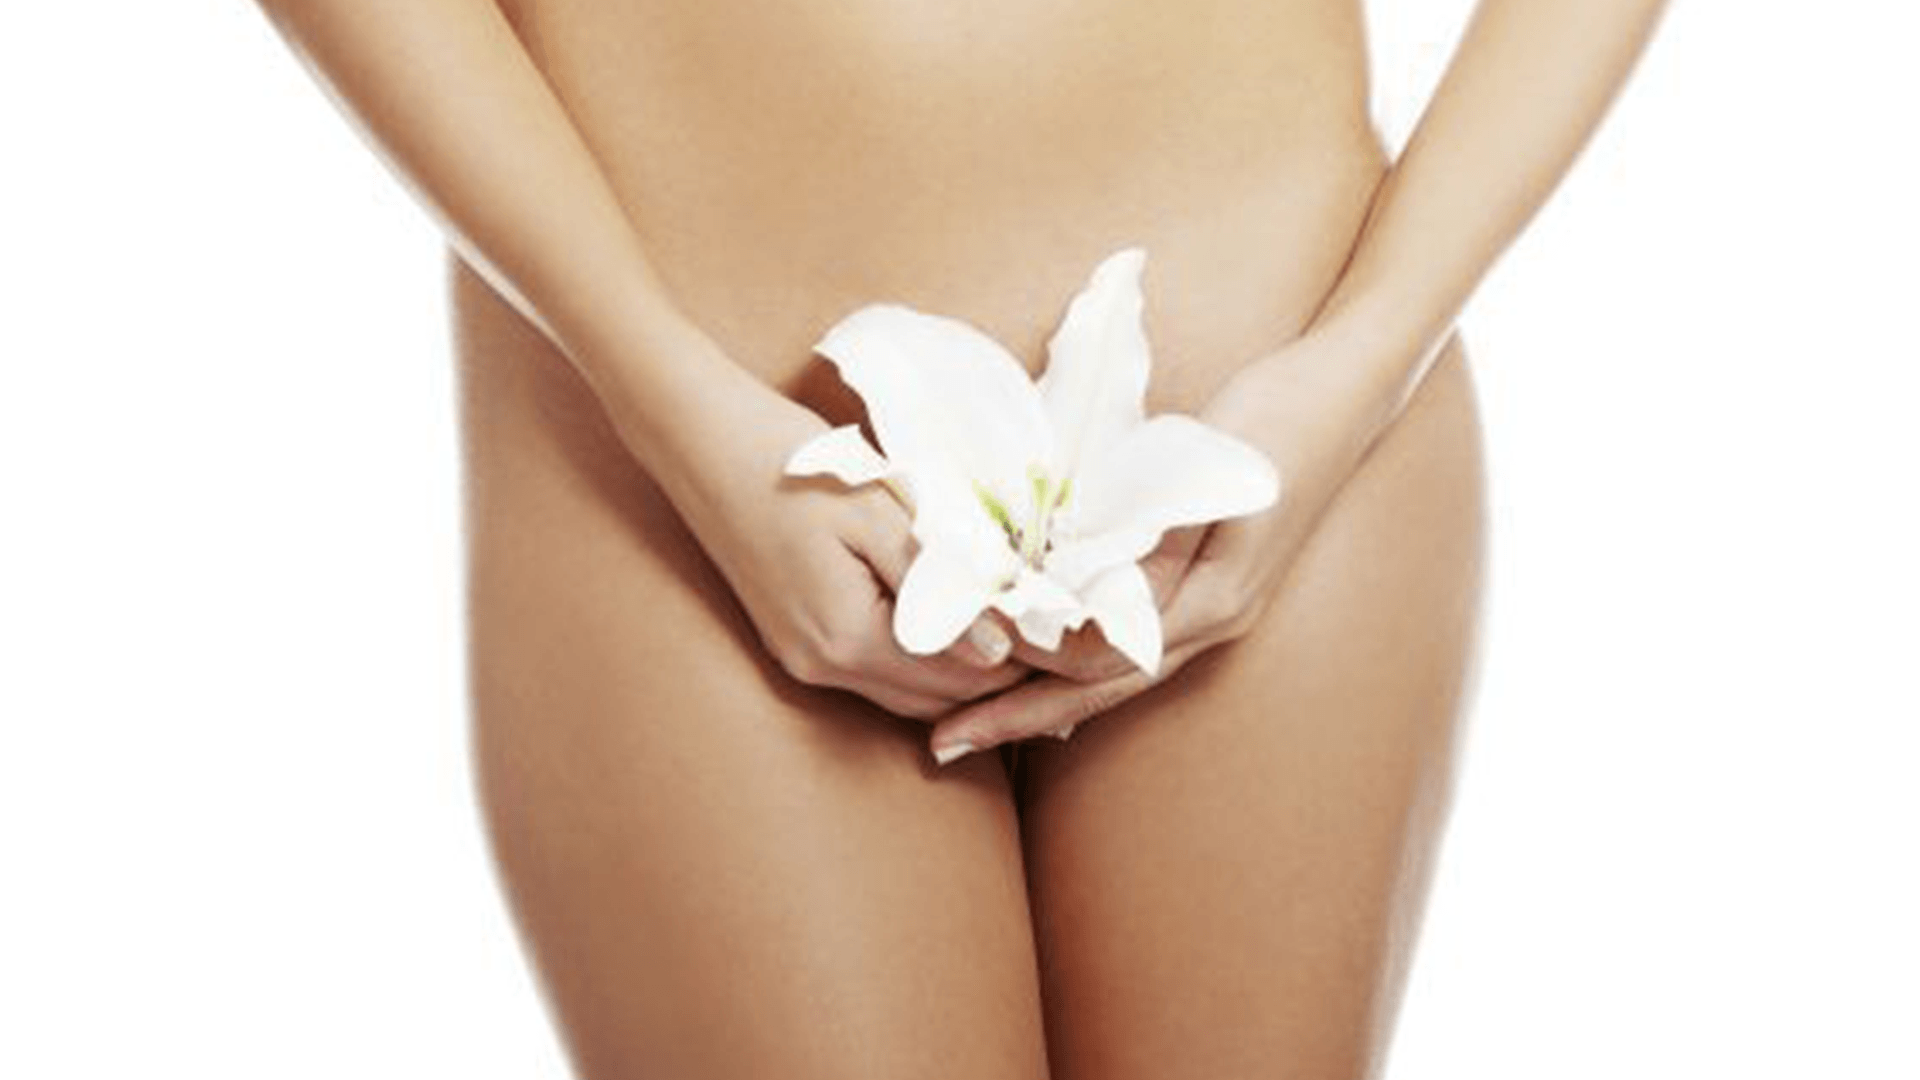 Easy tricks to get rid of vaginal infections